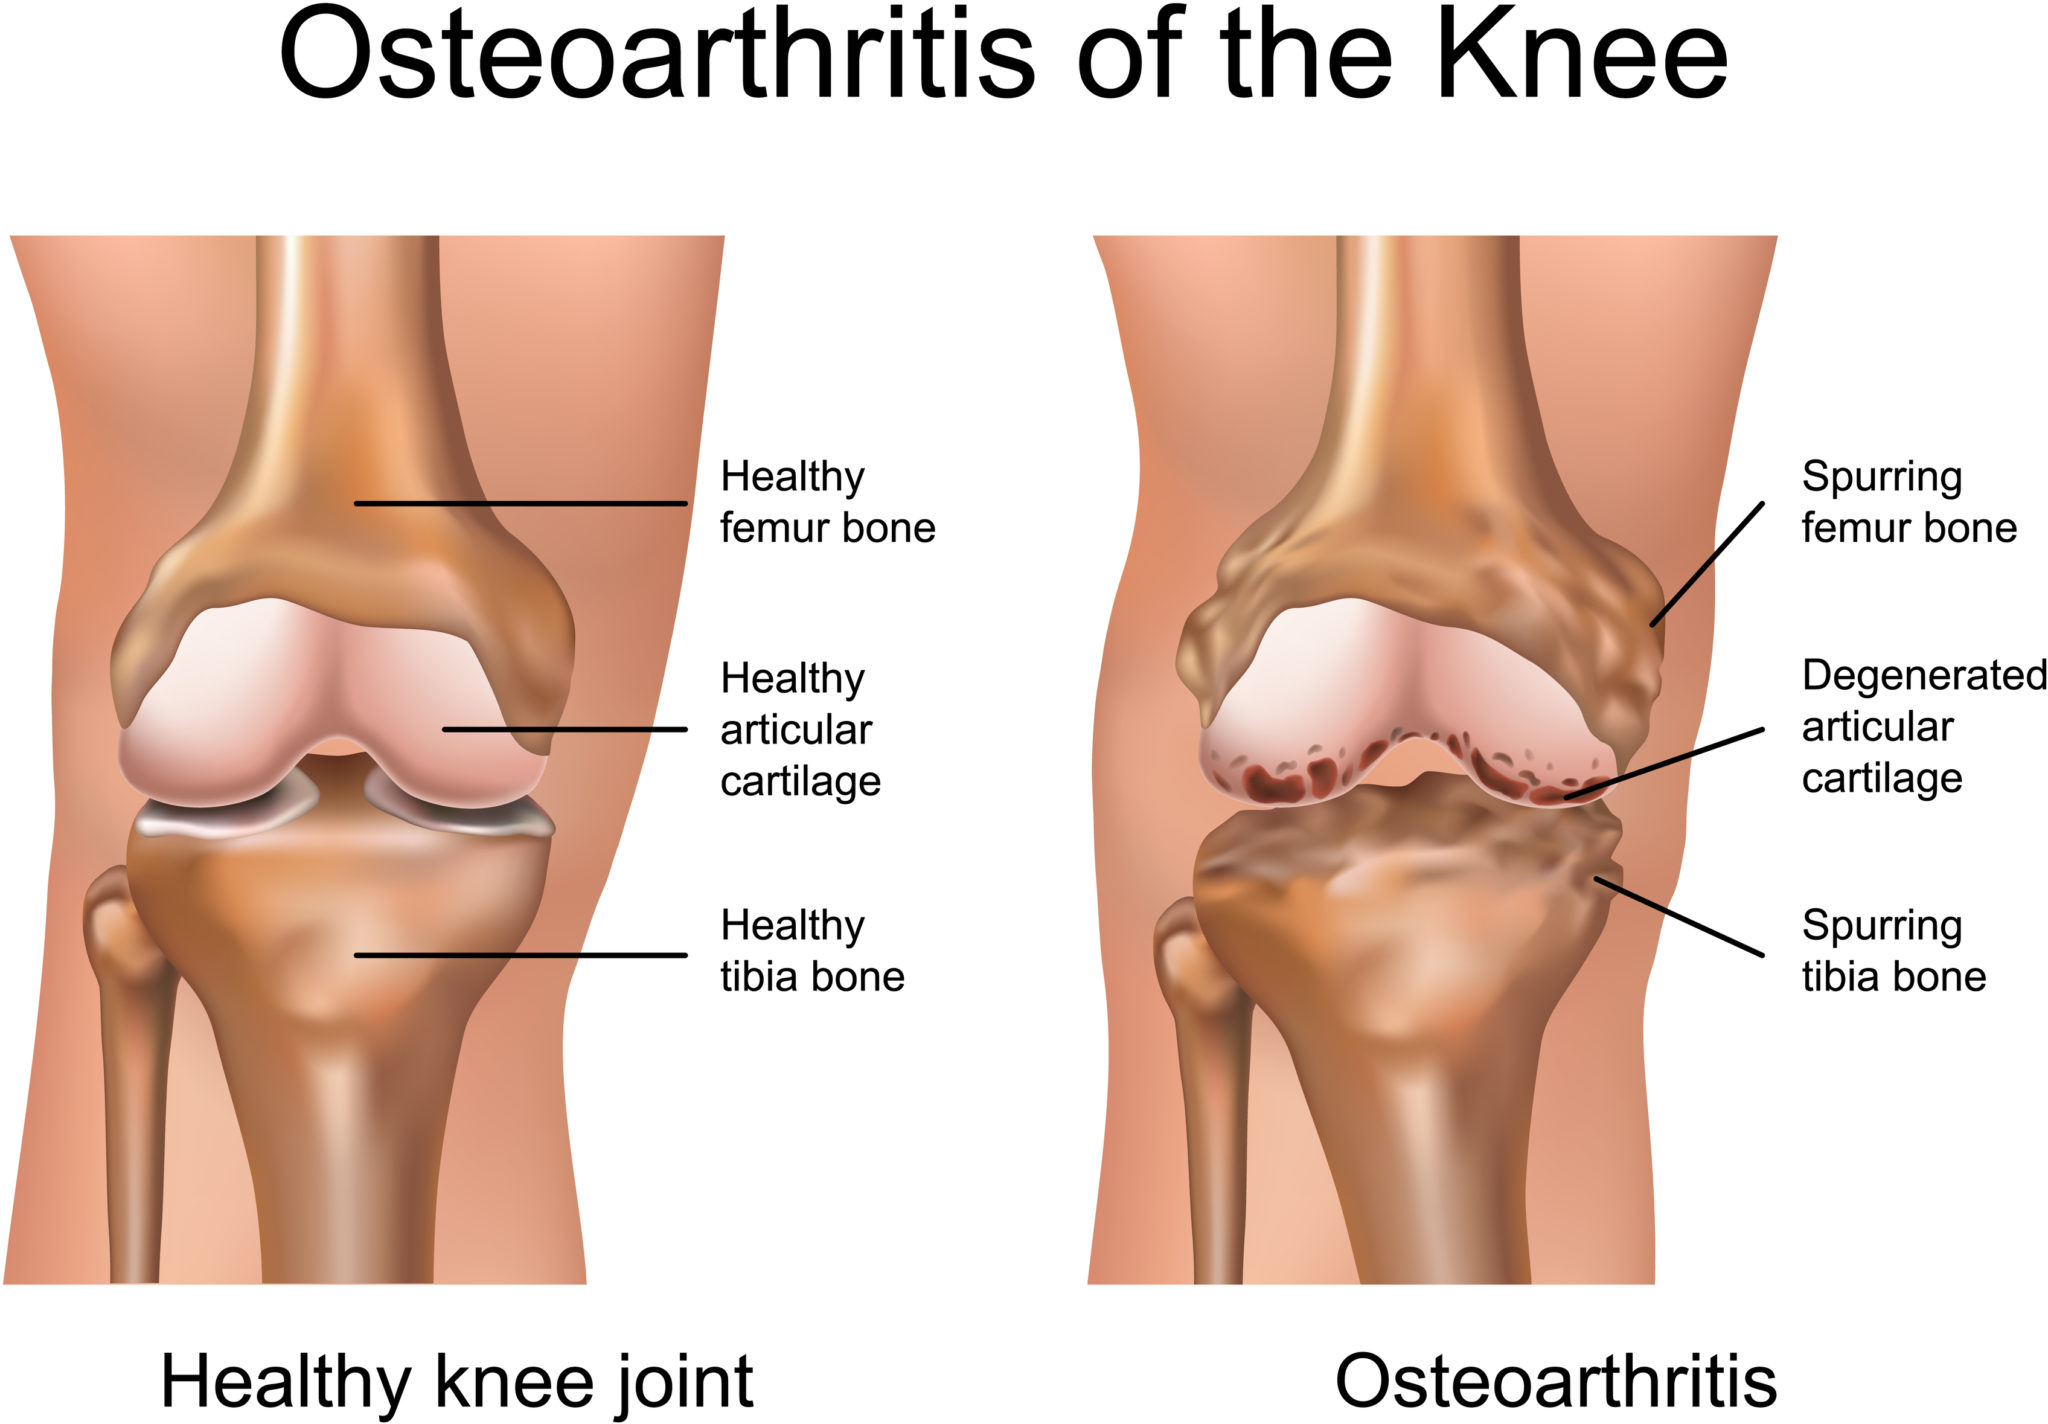 OSTEOARTHRITIS ITS CAUSES AND ITS HOMOEOPATHIC MEDICINE